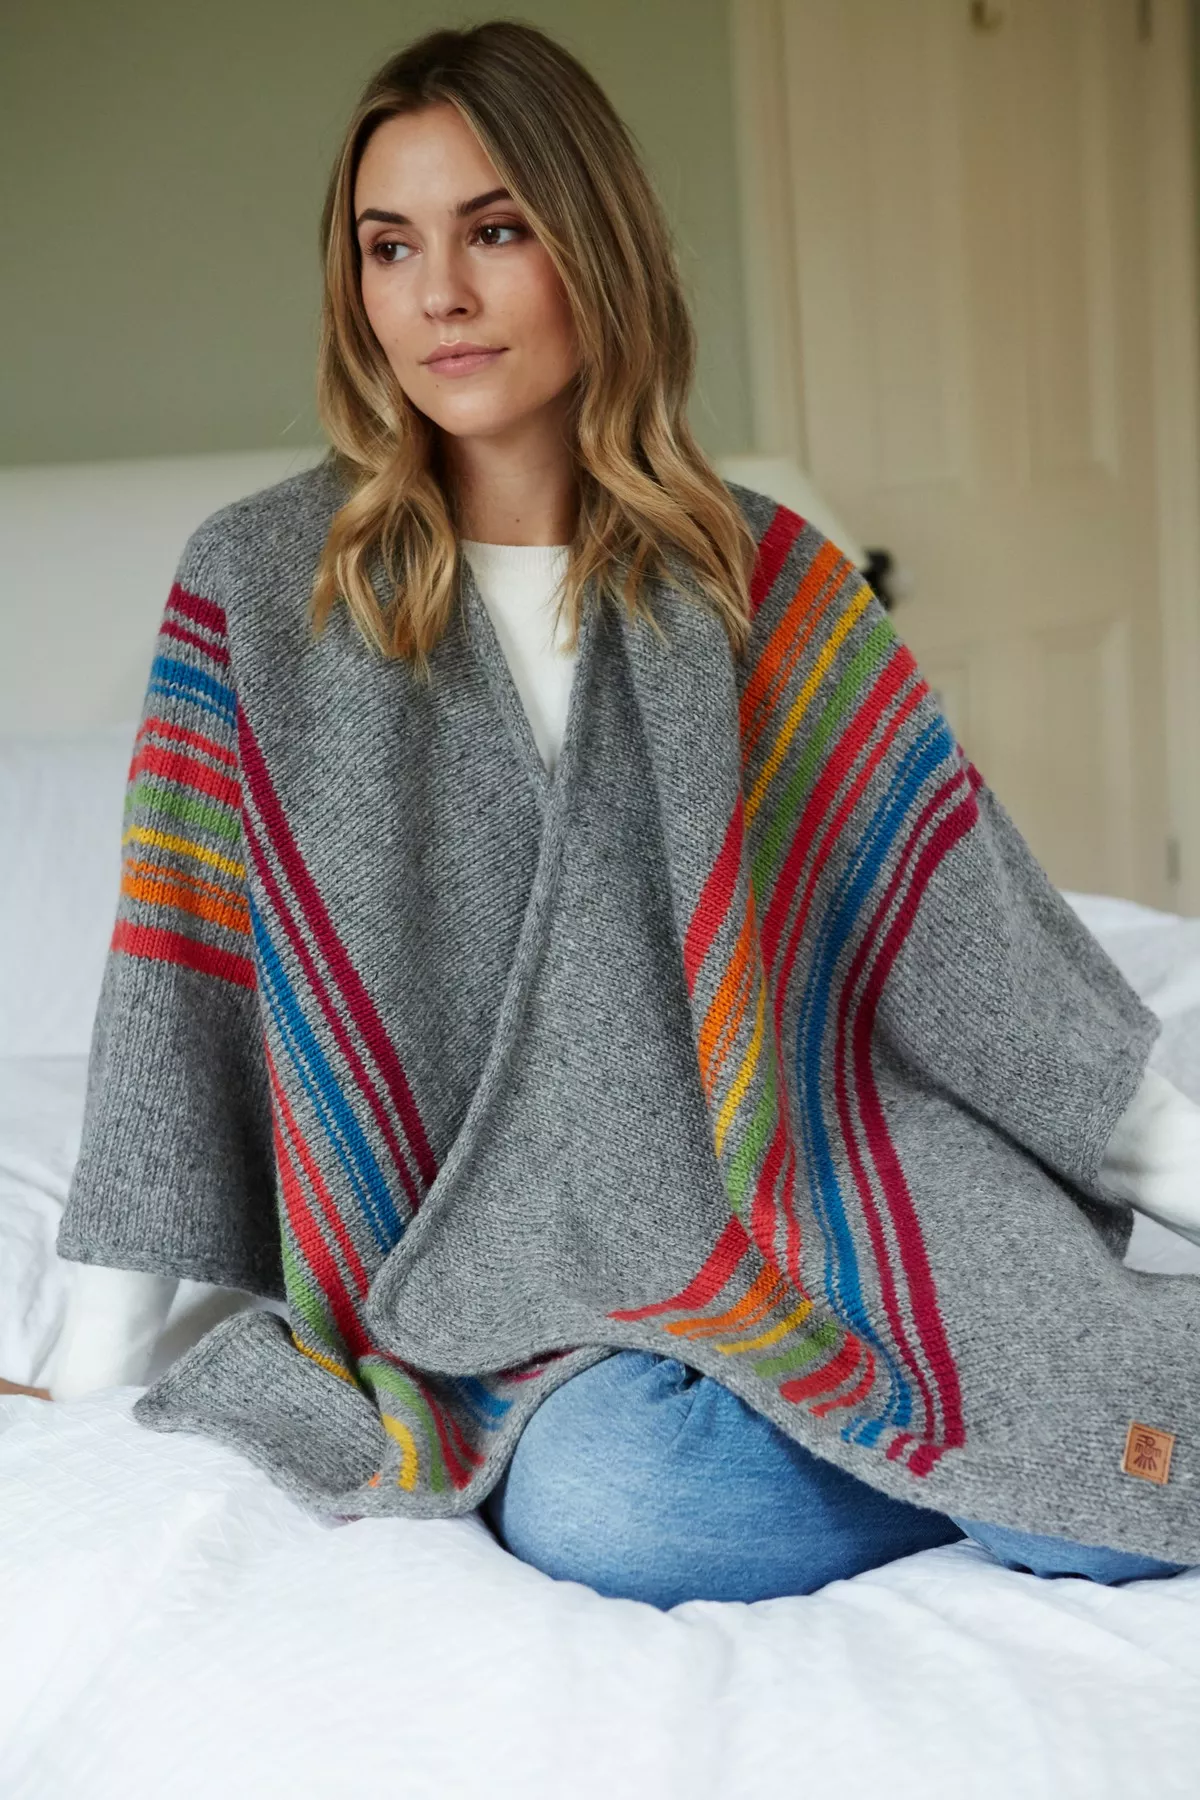 Our wool wraps are perfect for indoors as a blanket and out doors if its cold